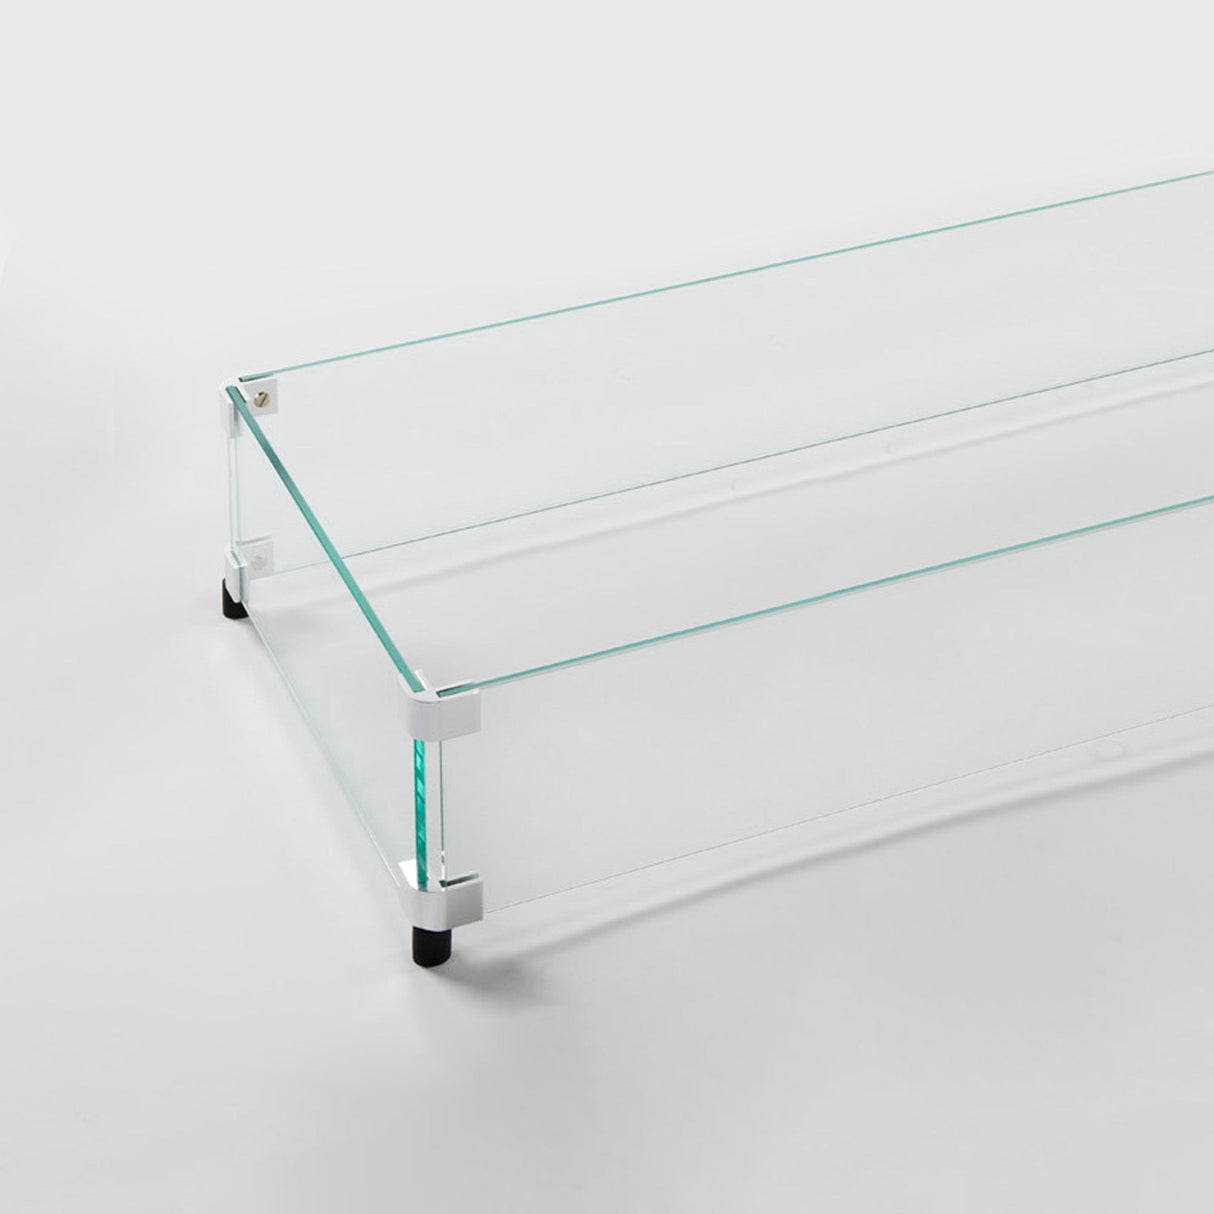 A side view of the Linear Glass Wind Guard set up on a white background